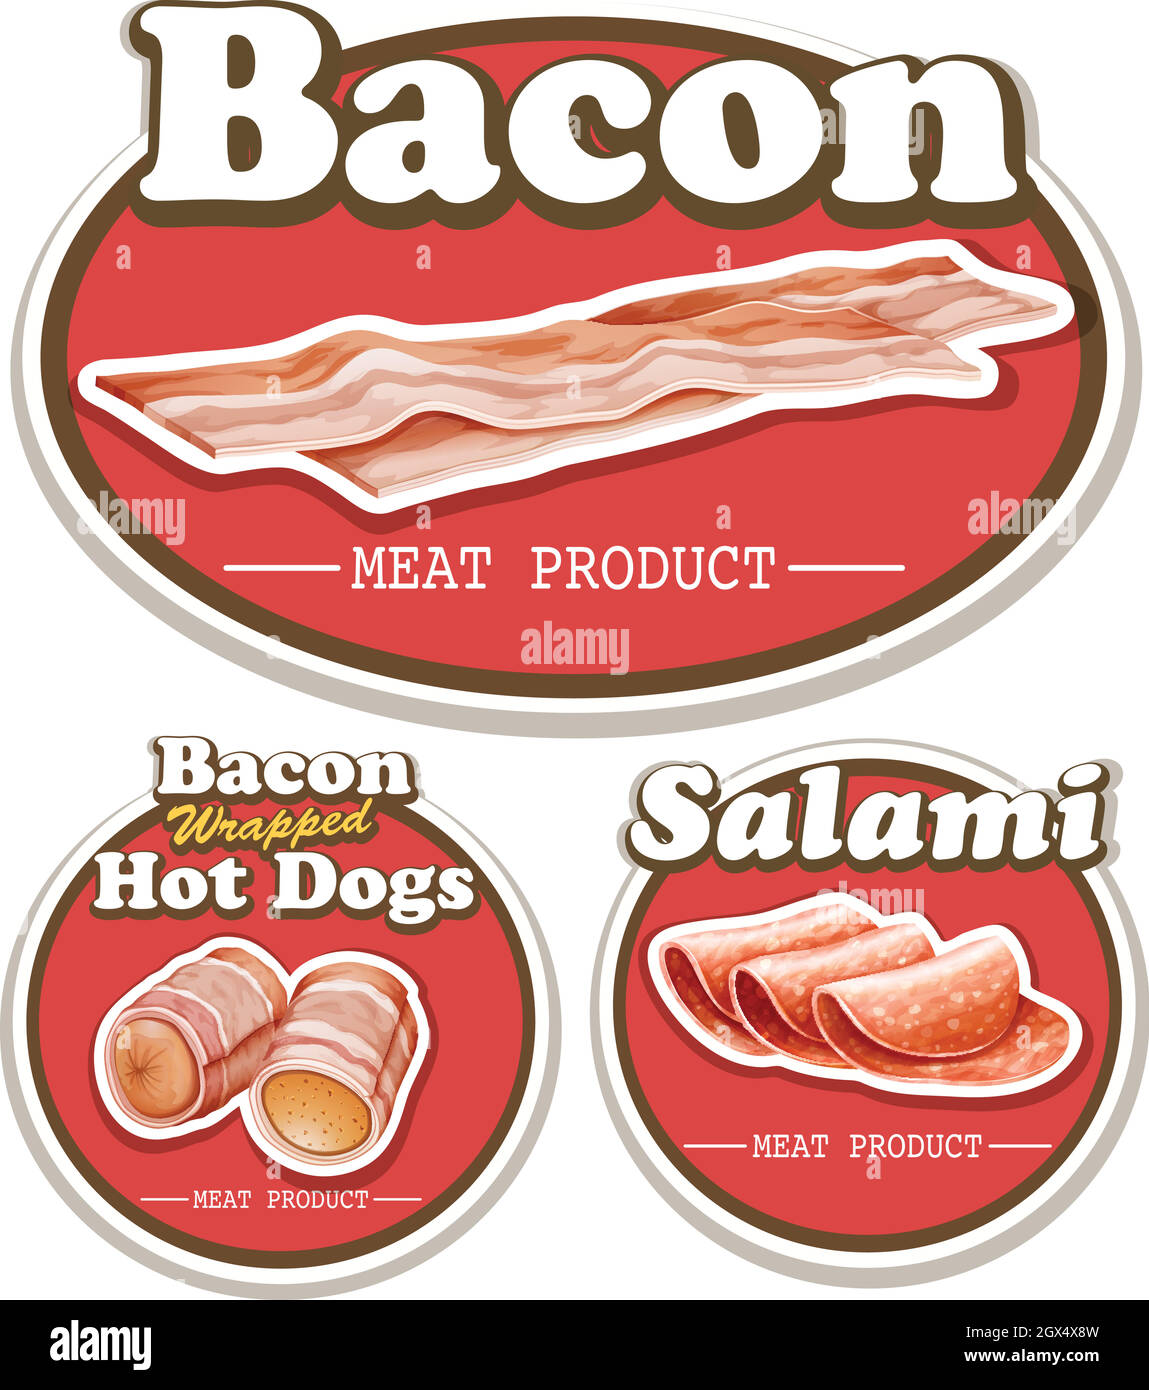 Meat product with bacon and salami Stock Vector